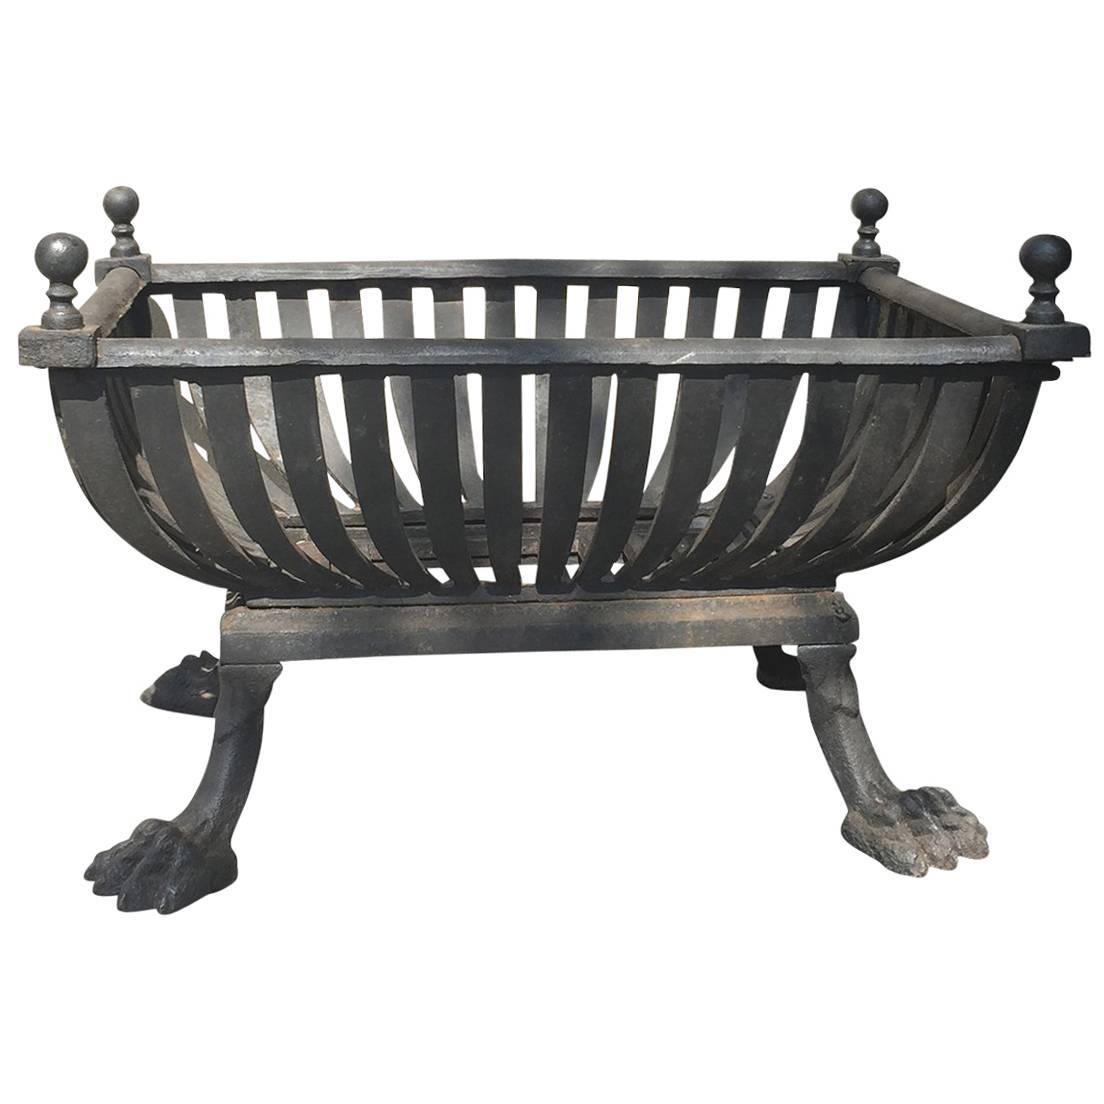 c.1900 Neoclassical Fire Grate with Claw Feet